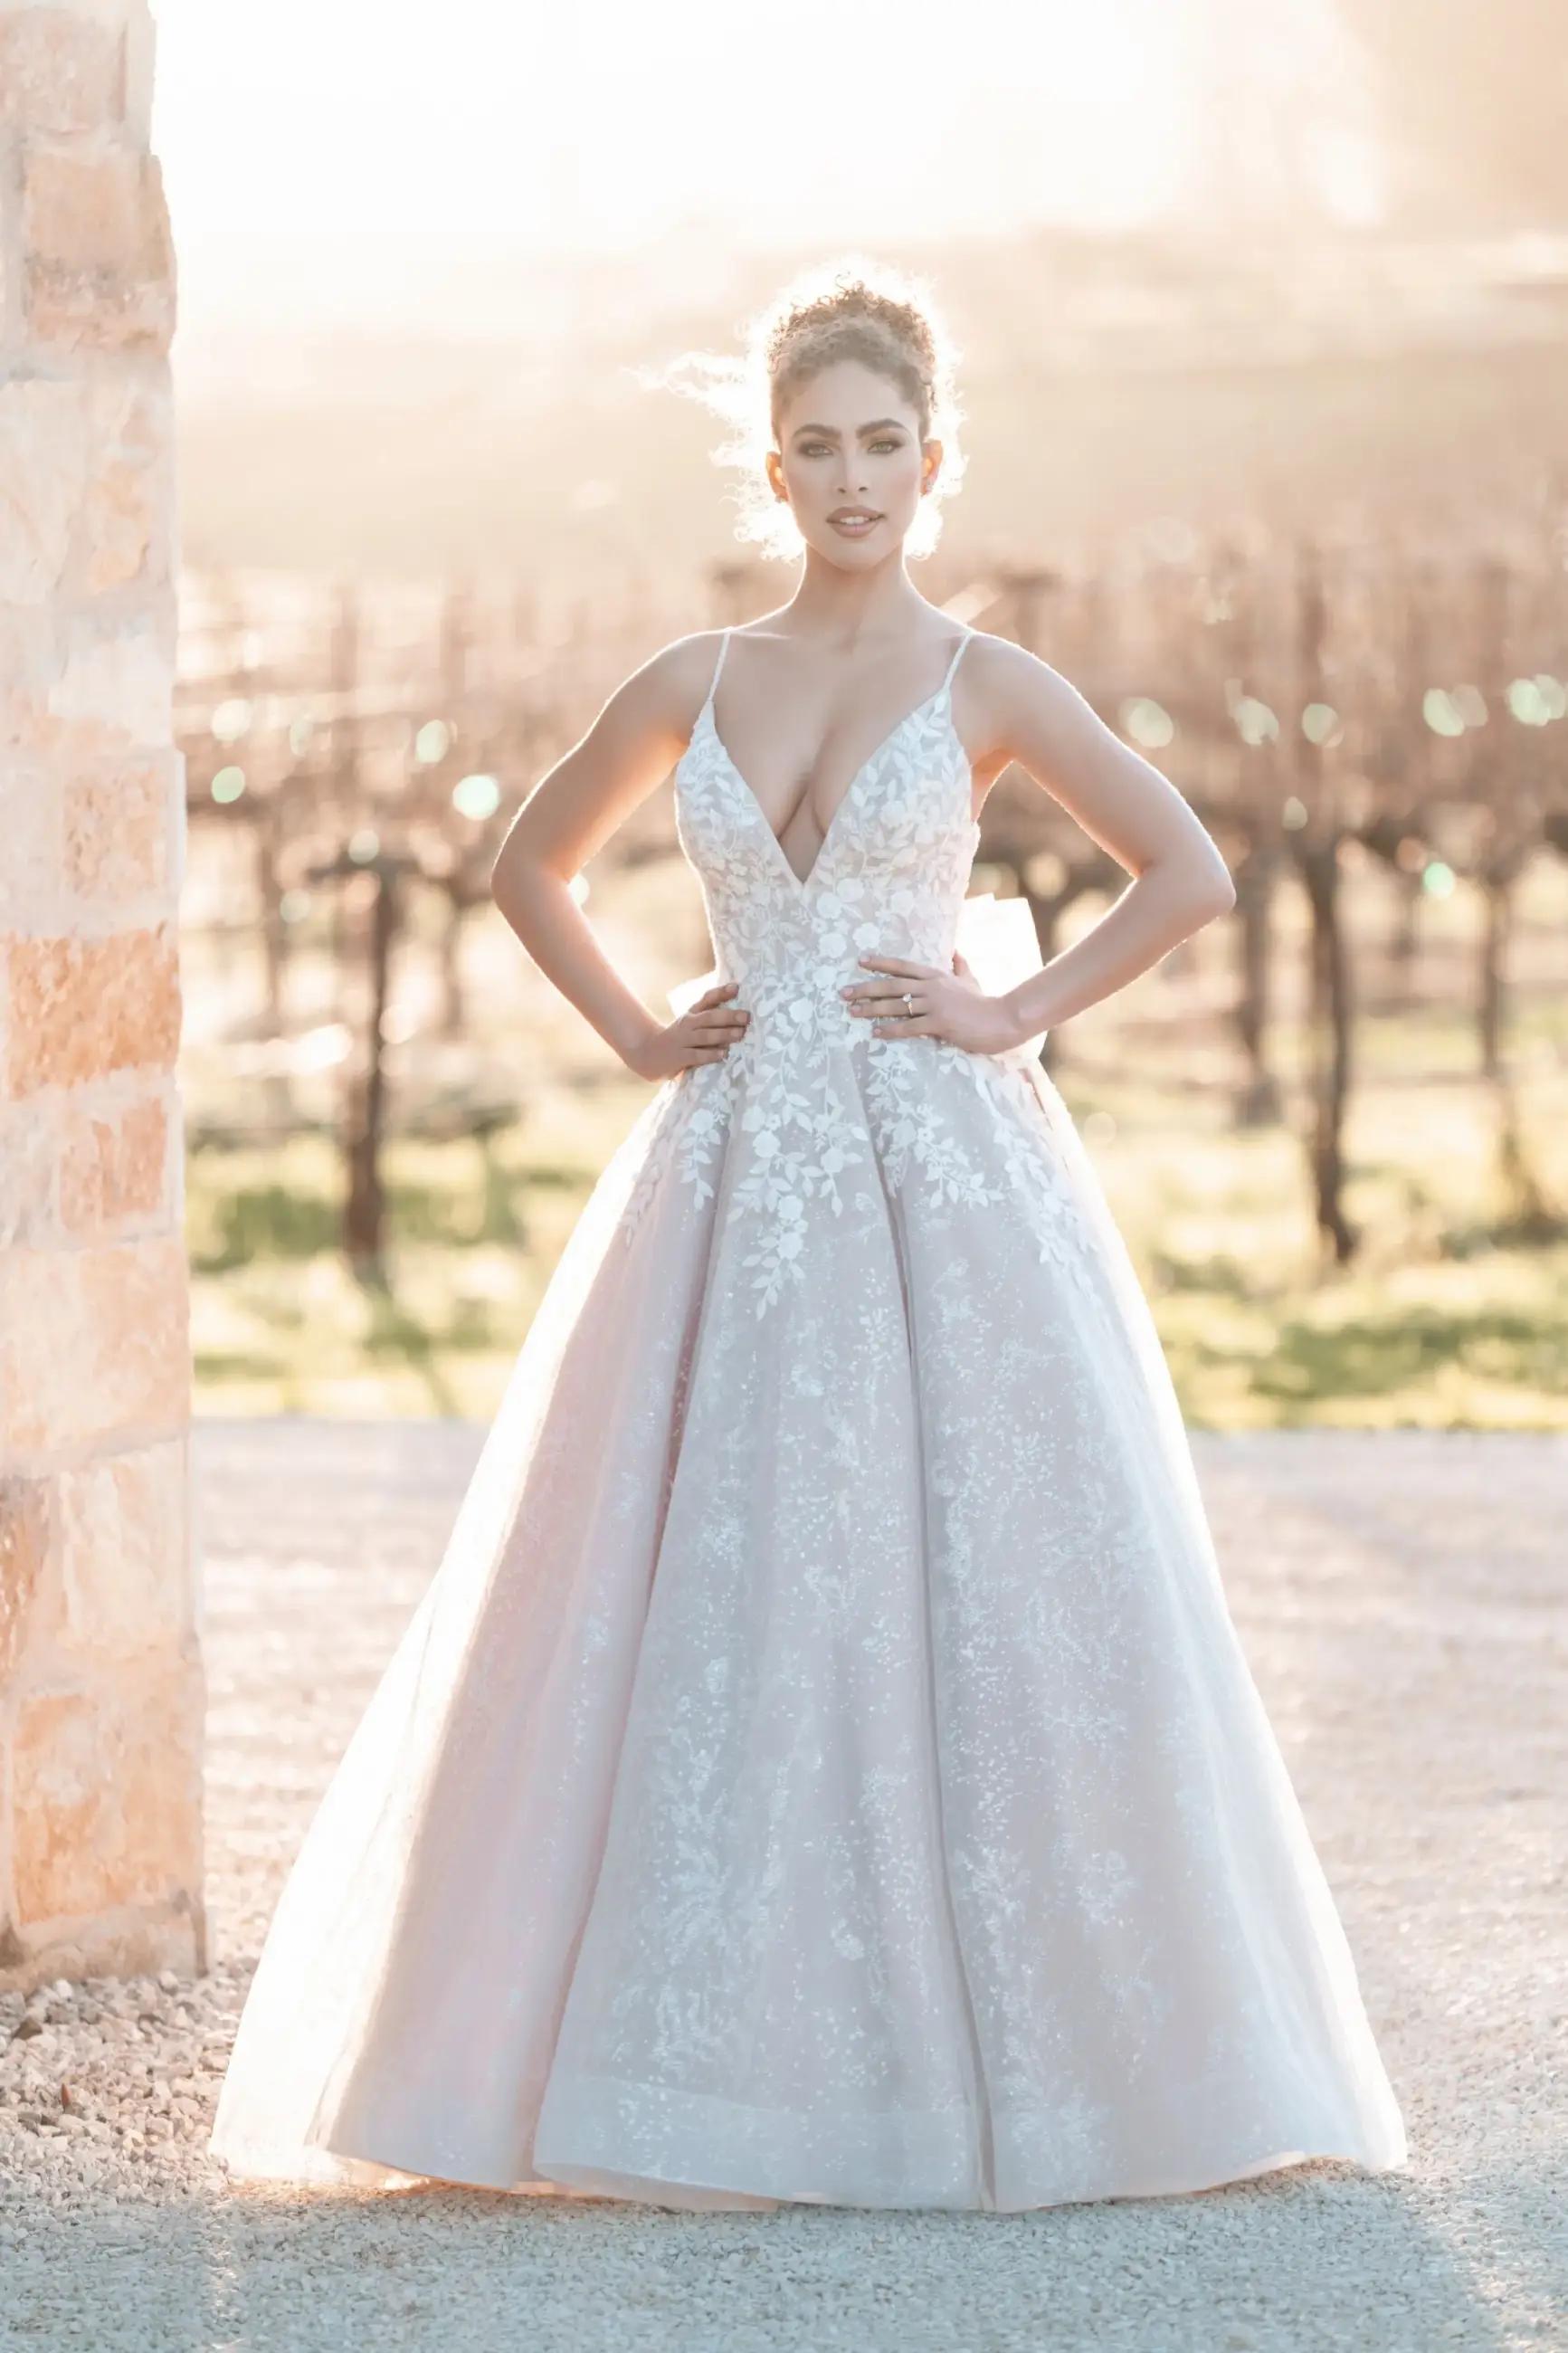 Ultimate Wedding Gown Guide from Mariella Creations For Your Dream Day! Image